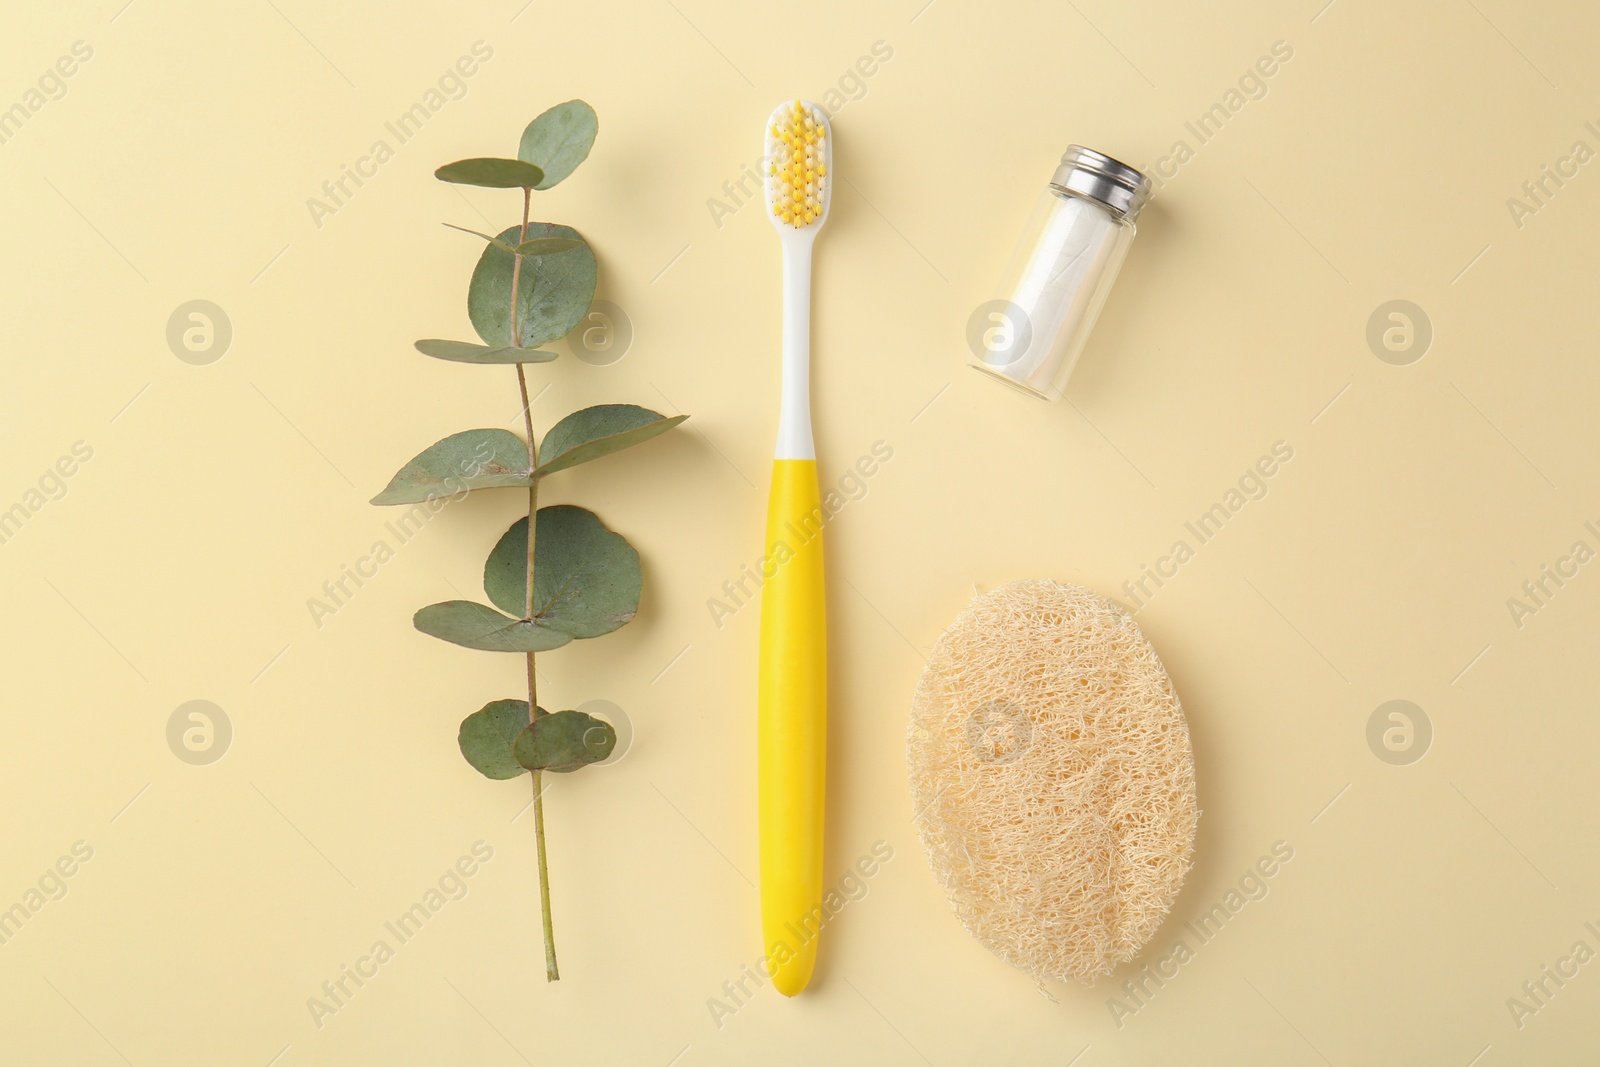 Photo of Plastic toothbrush, eucalyptus branch and other toiletries on pale yellow background, flat lay